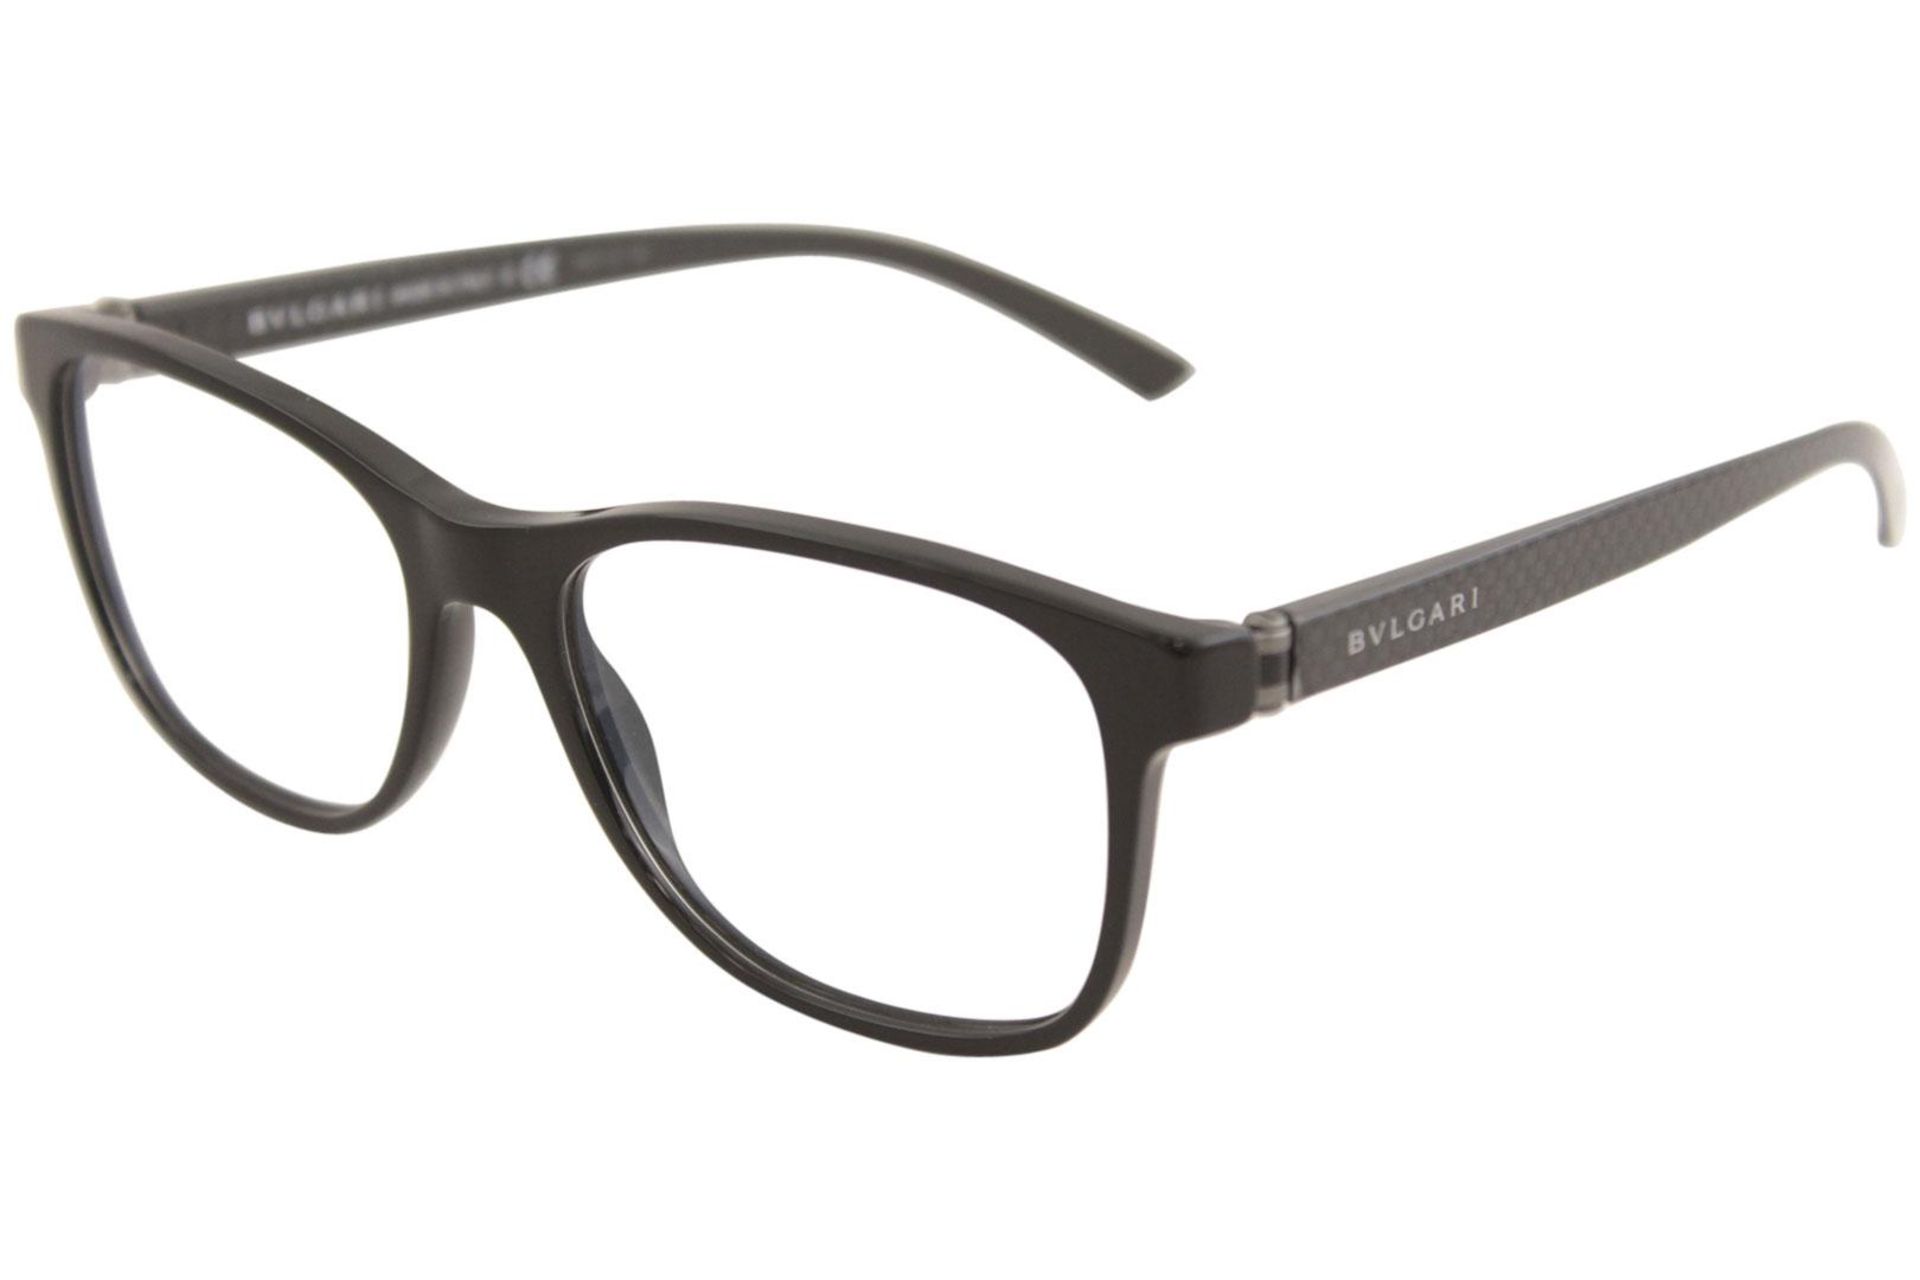 Bvlgari Gents Spectacle Frames with Original Case Surplus Stock or Ex Demo - Image 4 of 7